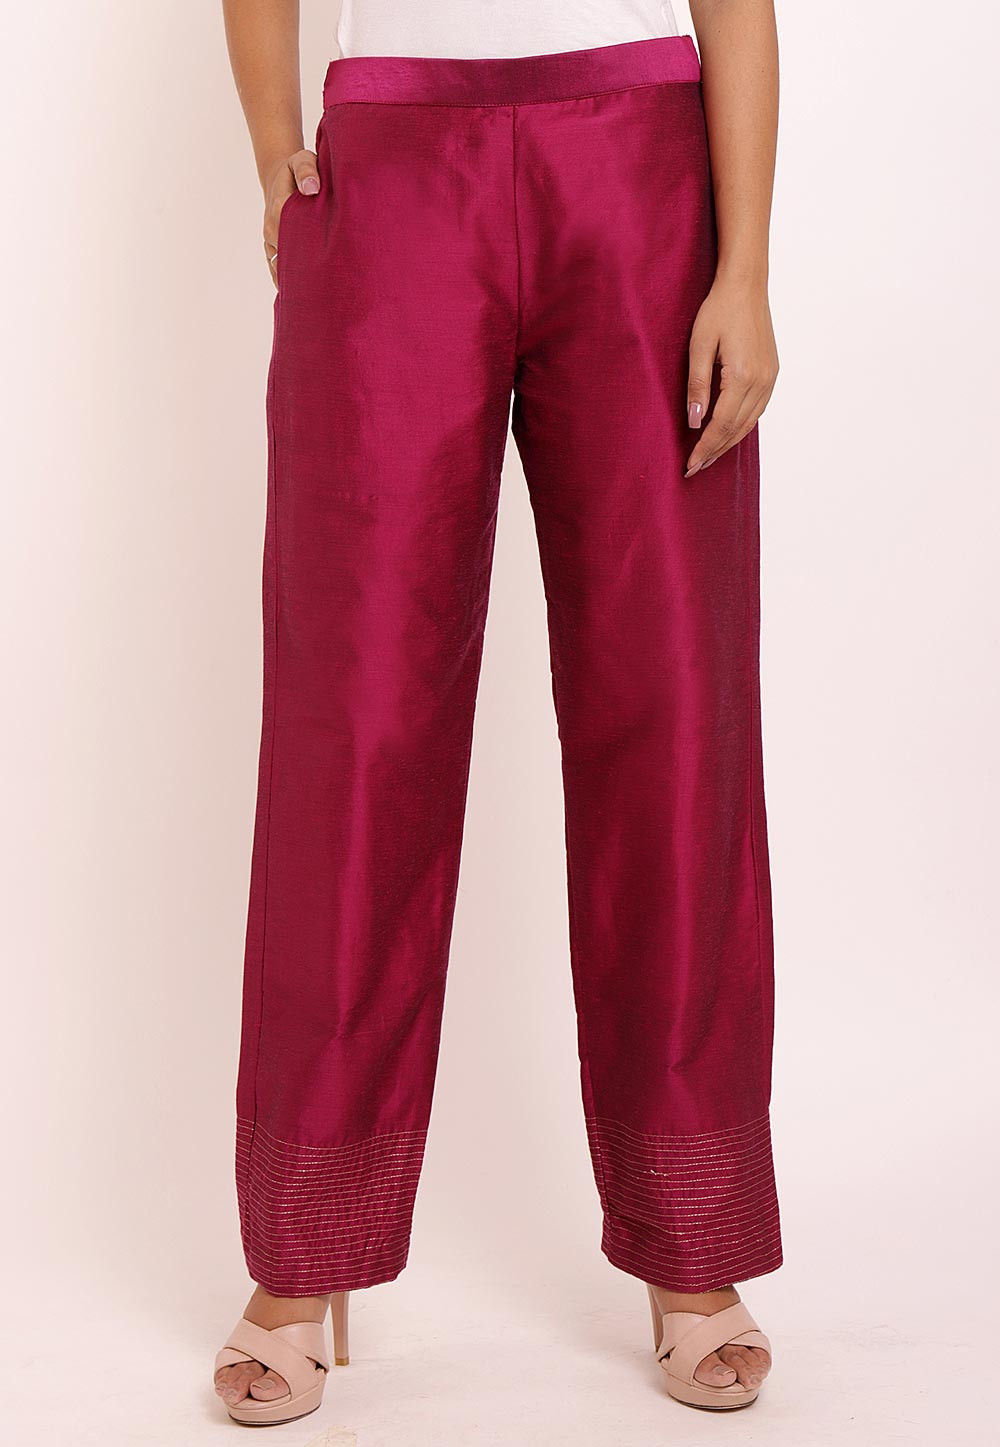 Buy Raw Silk Material Cigarette Pants Trousers Online in India - Etsy